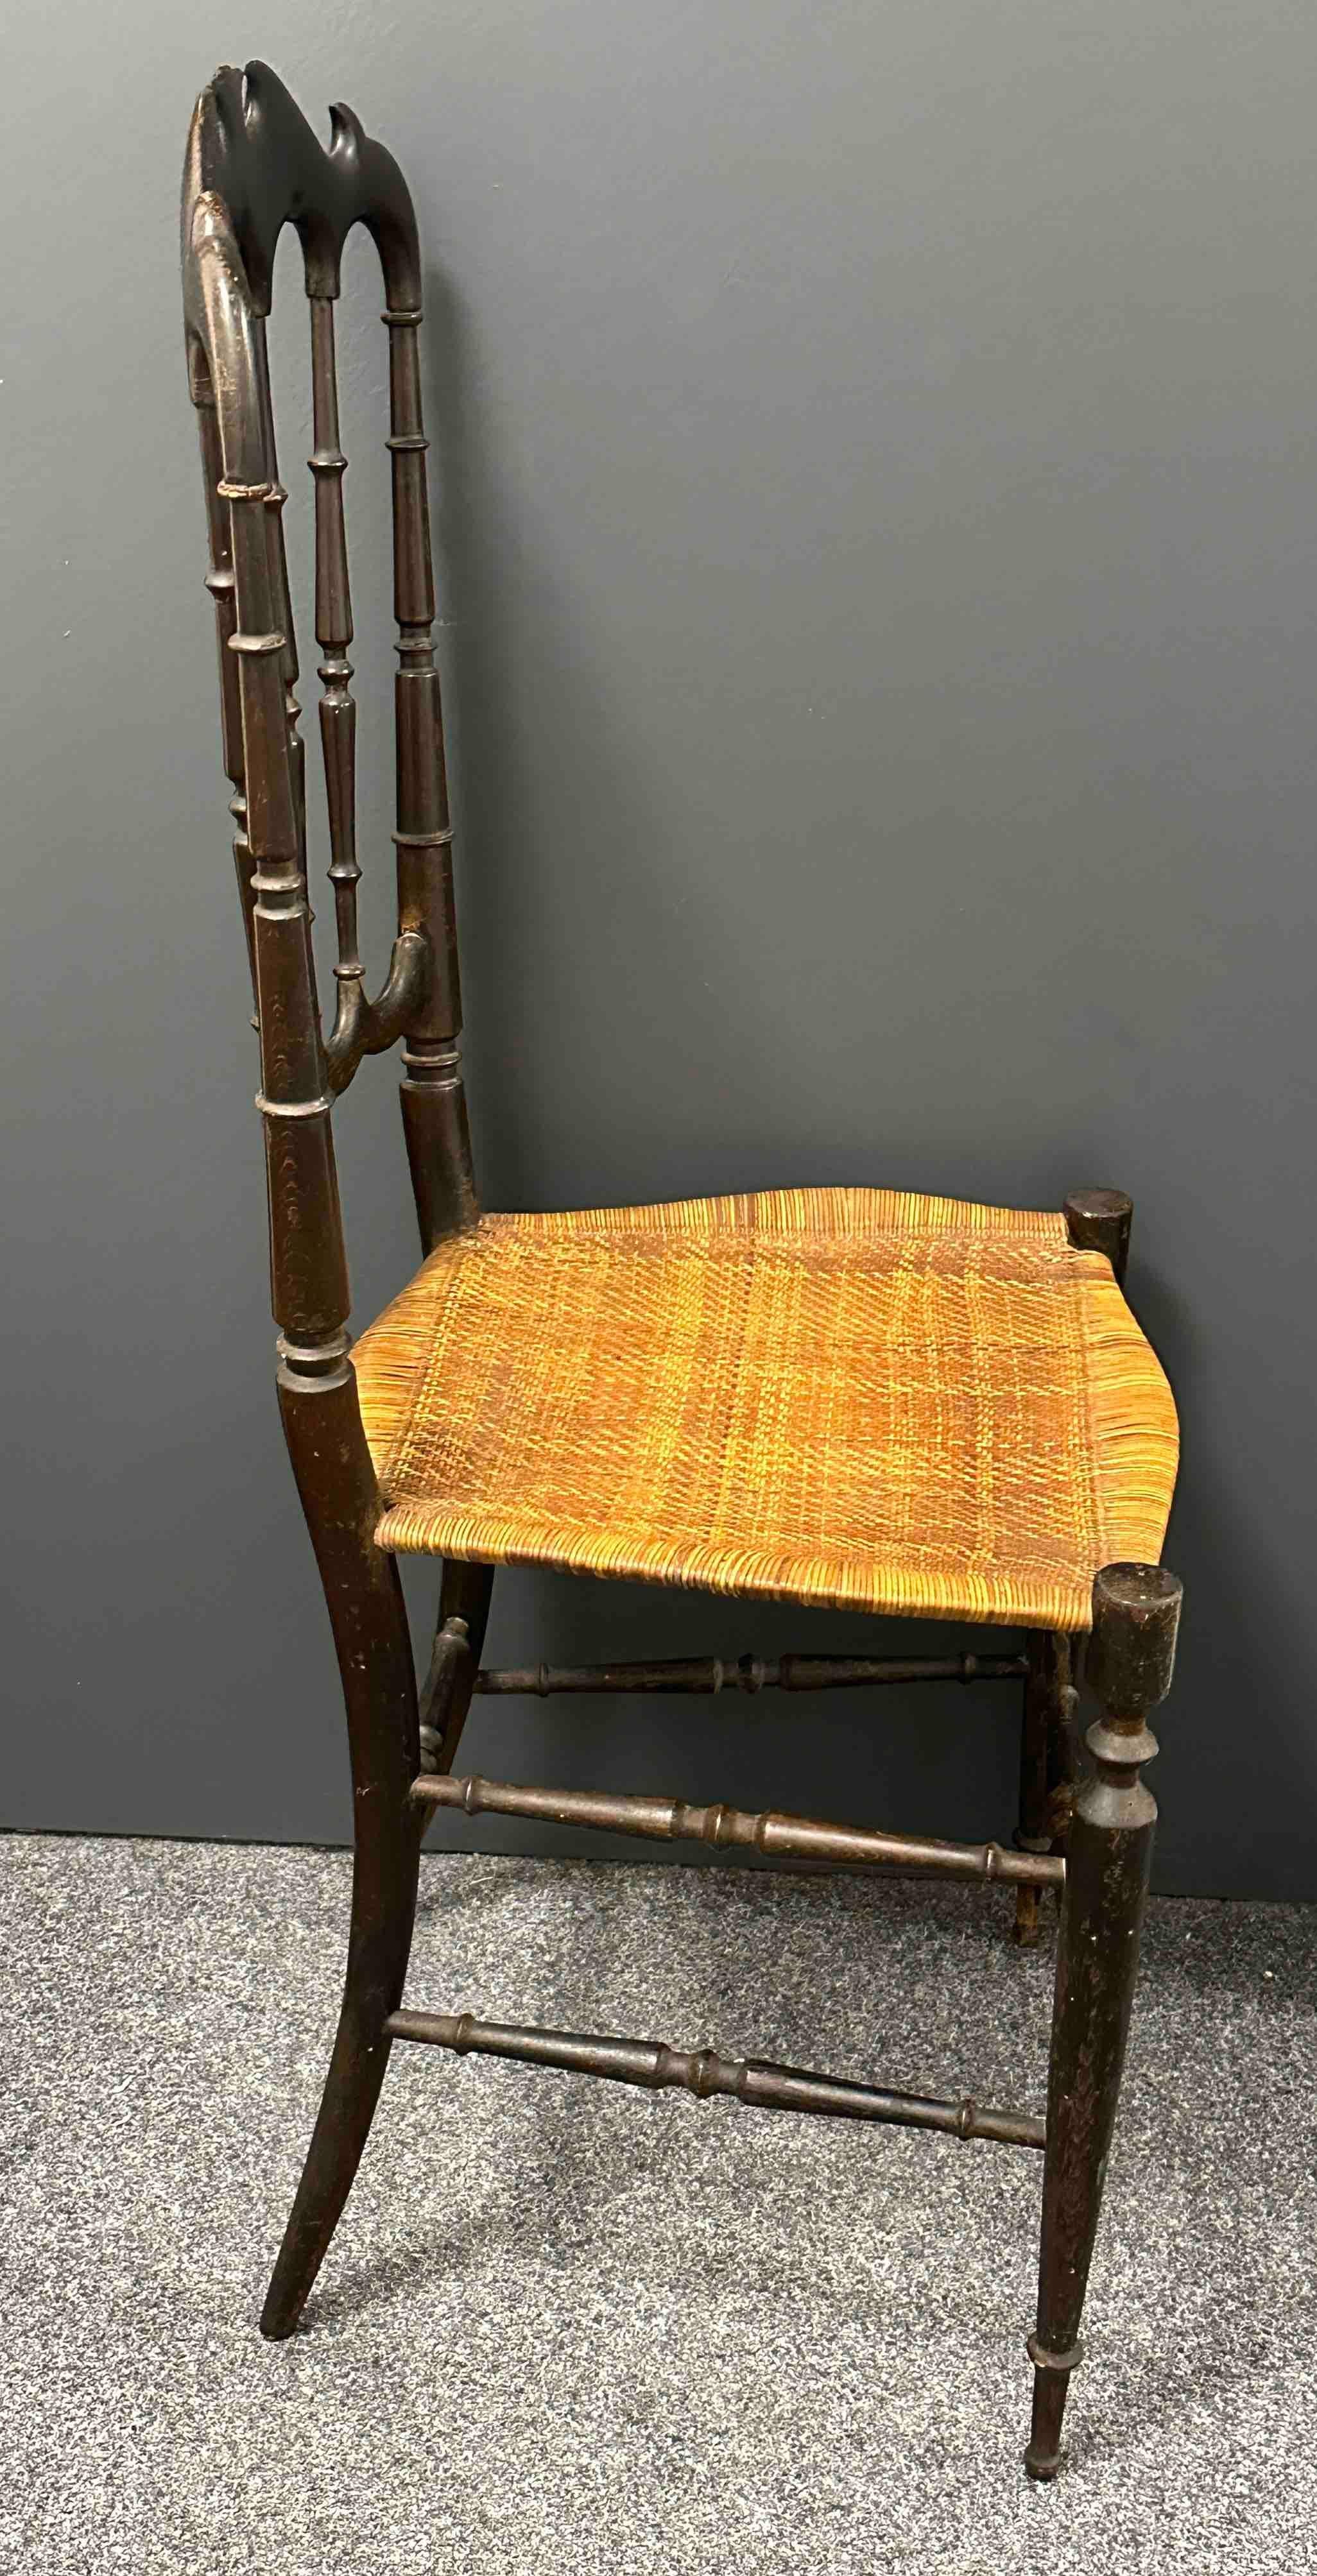 Beautiful Chiavari Wooden Chair Wicker Seat, Made in Liguria, Italy, 1930s For Sale 8